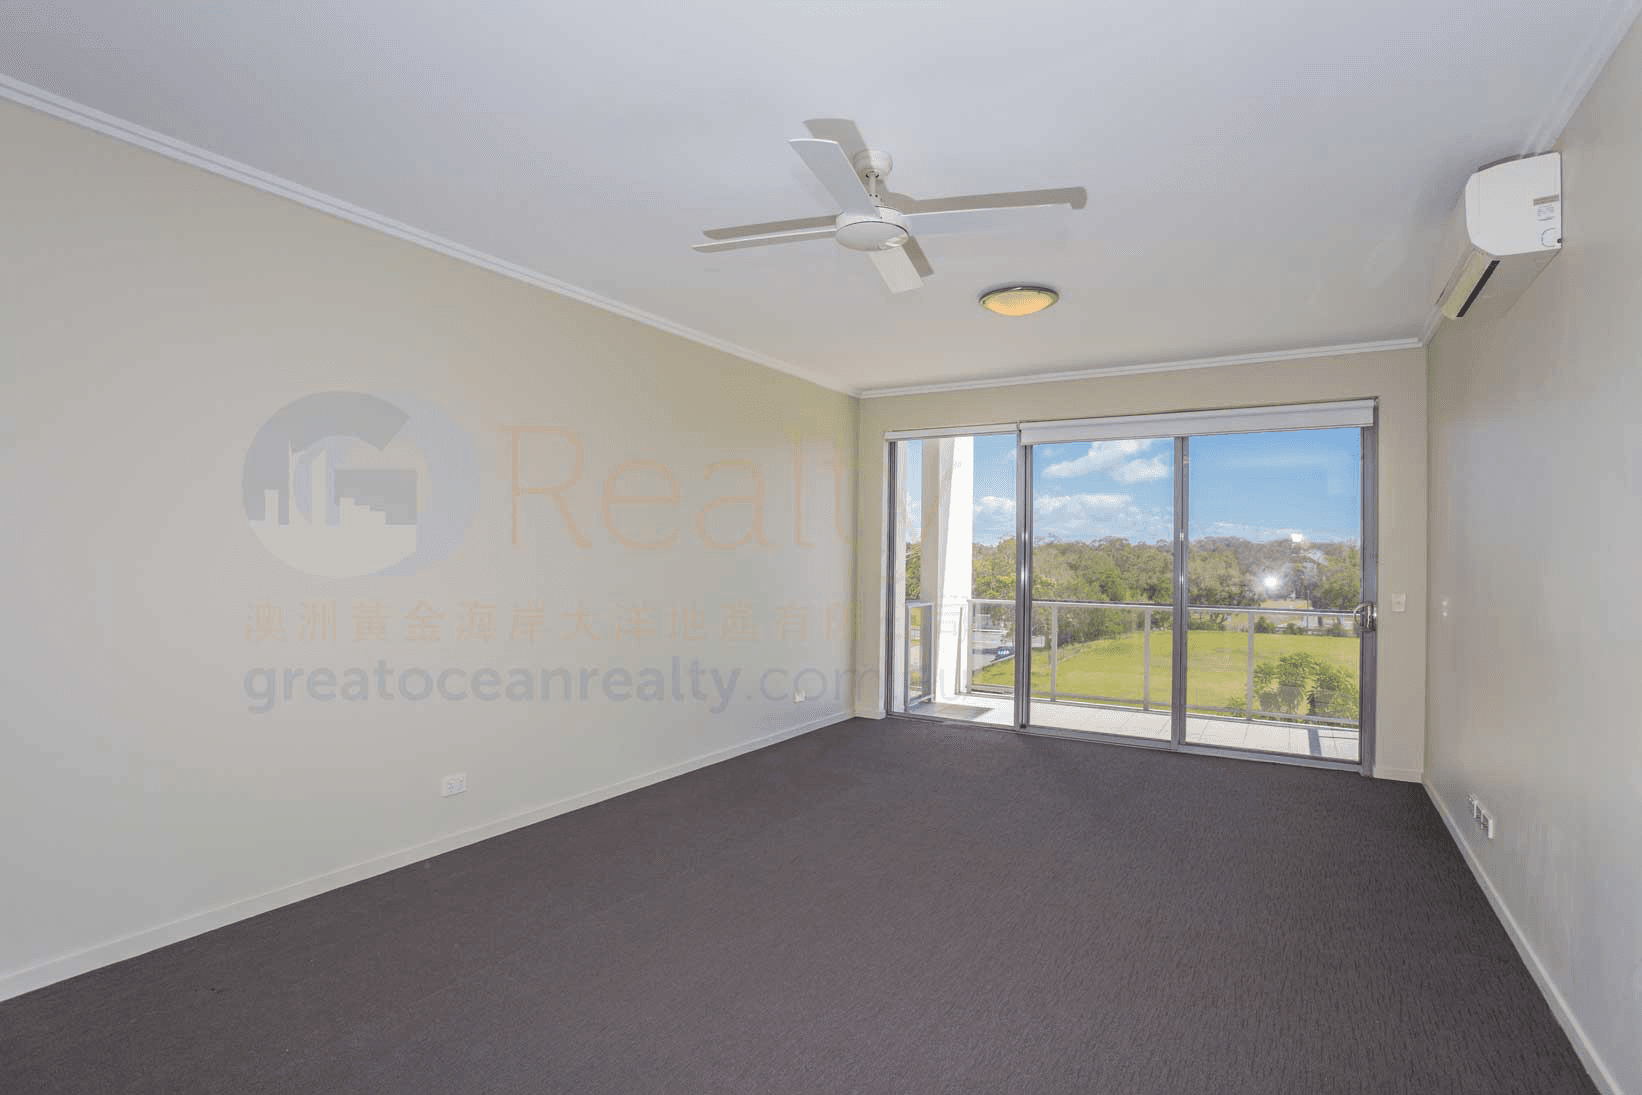 17/154 Musgrave Avenue, SOUTHPORT, QLD 4215